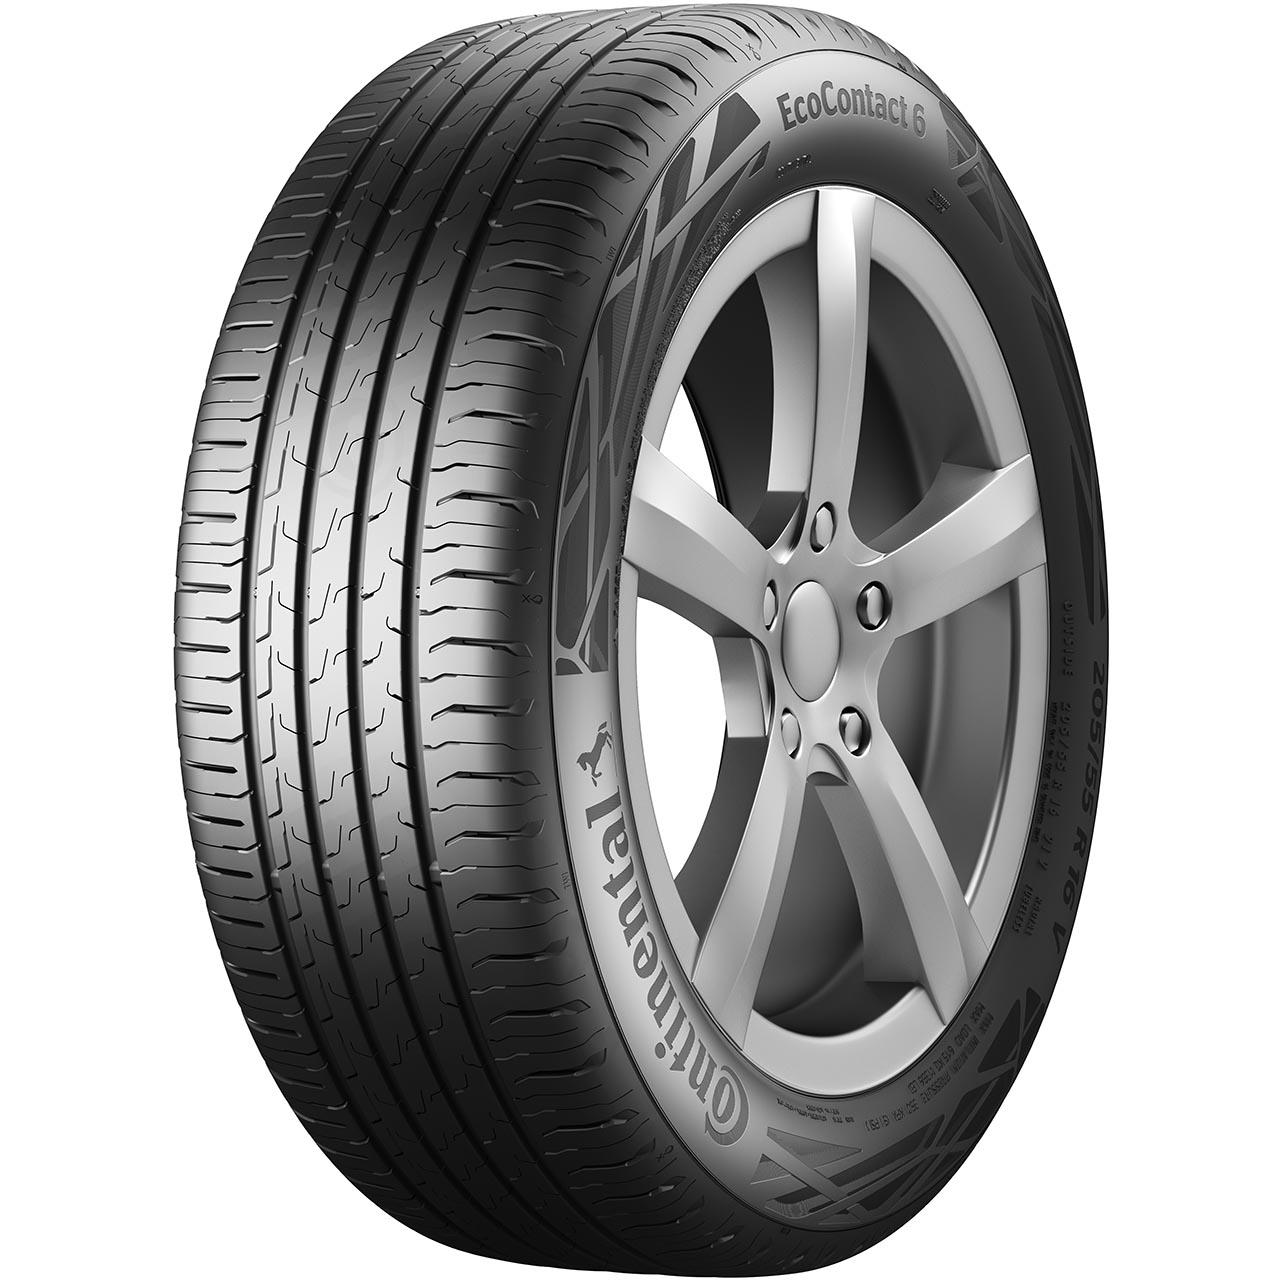 Continental ECOCONTACT 6 205/55R16 94H XL VW